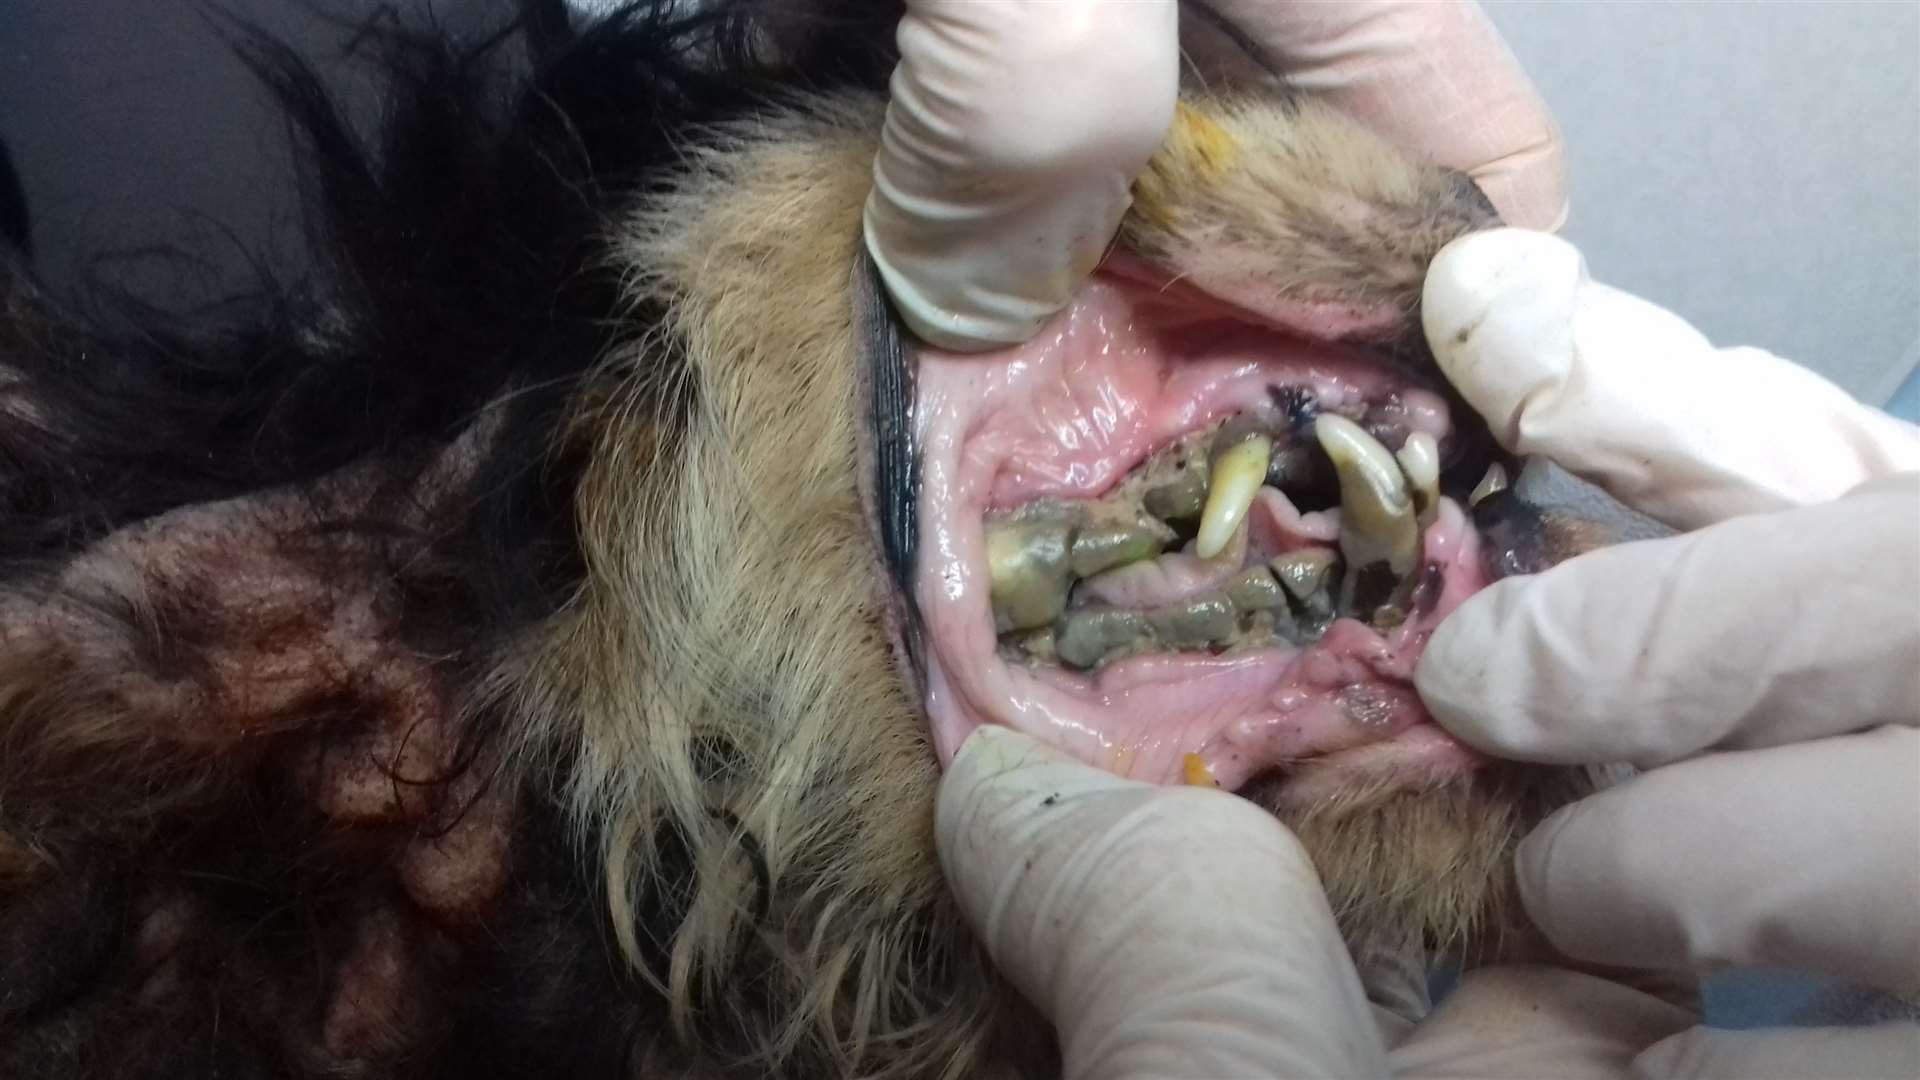 A considerable amount of tartar covering the dog's molars and pre molars caused his gums to recede.